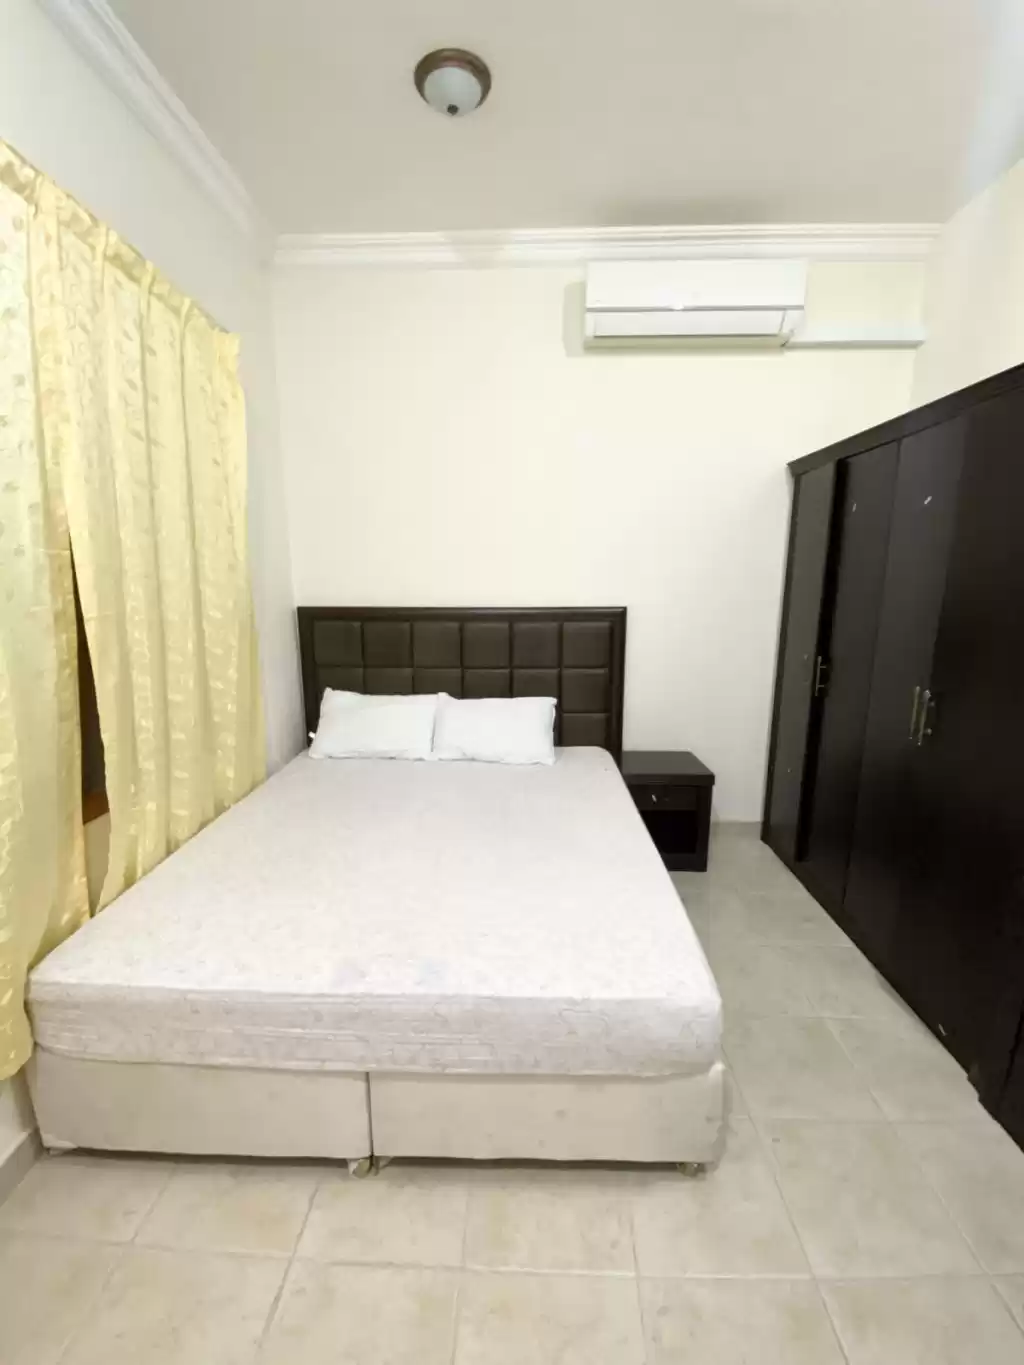 Residential Ready Property 1 Bedroom F/F Apartment  for rent in Al Sadd , Doha #12743 - 1  image 